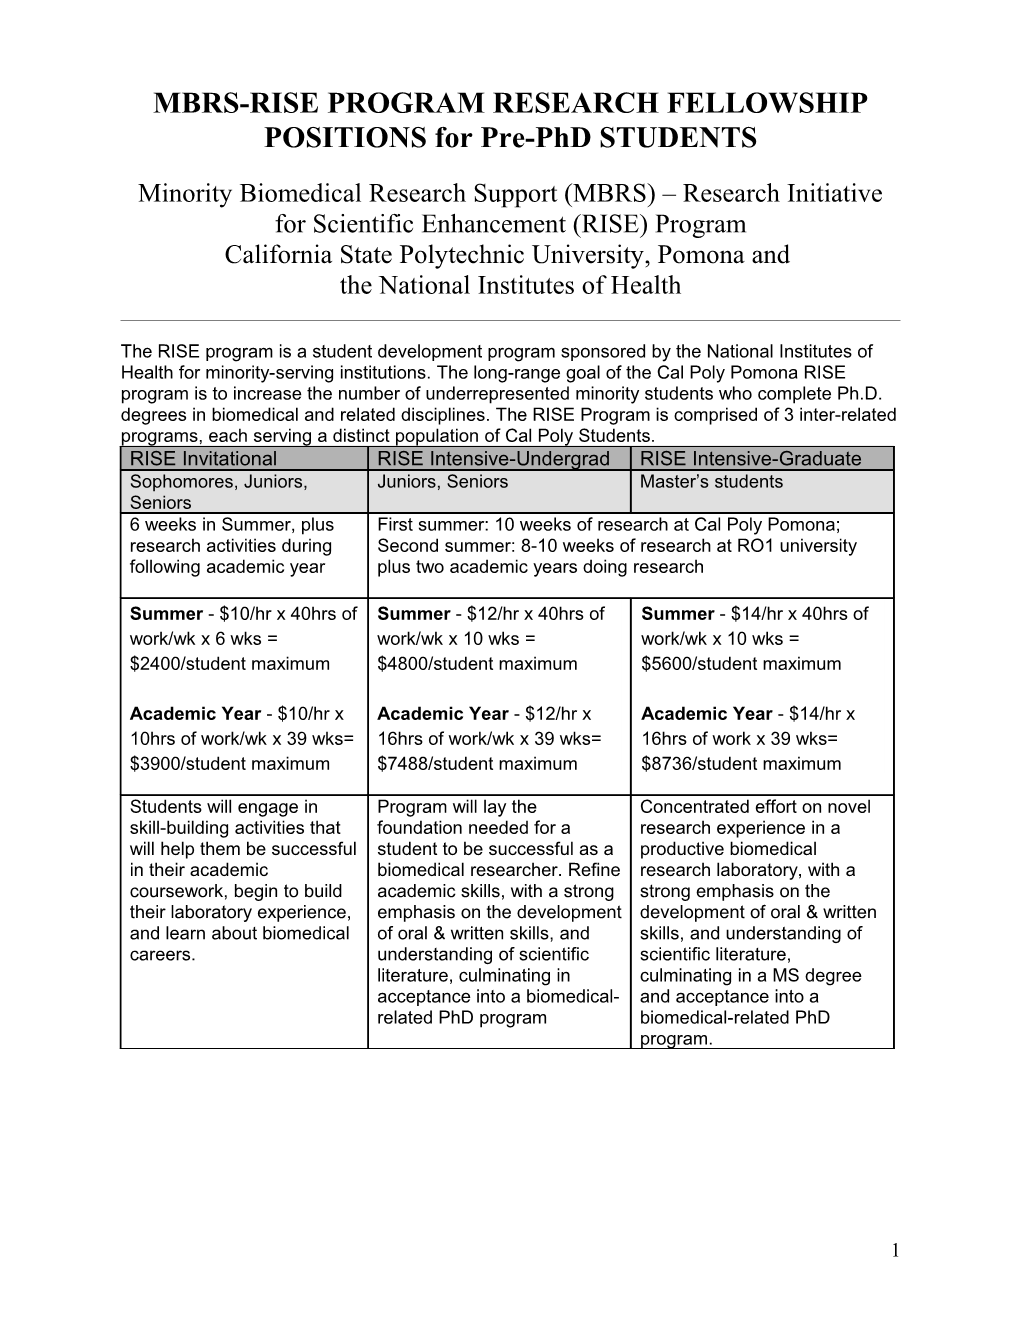 MBRS-RISE PROGRAM RESEARCH FELLOWSHIP POSITIONS for PRE-Phd STUDENTS